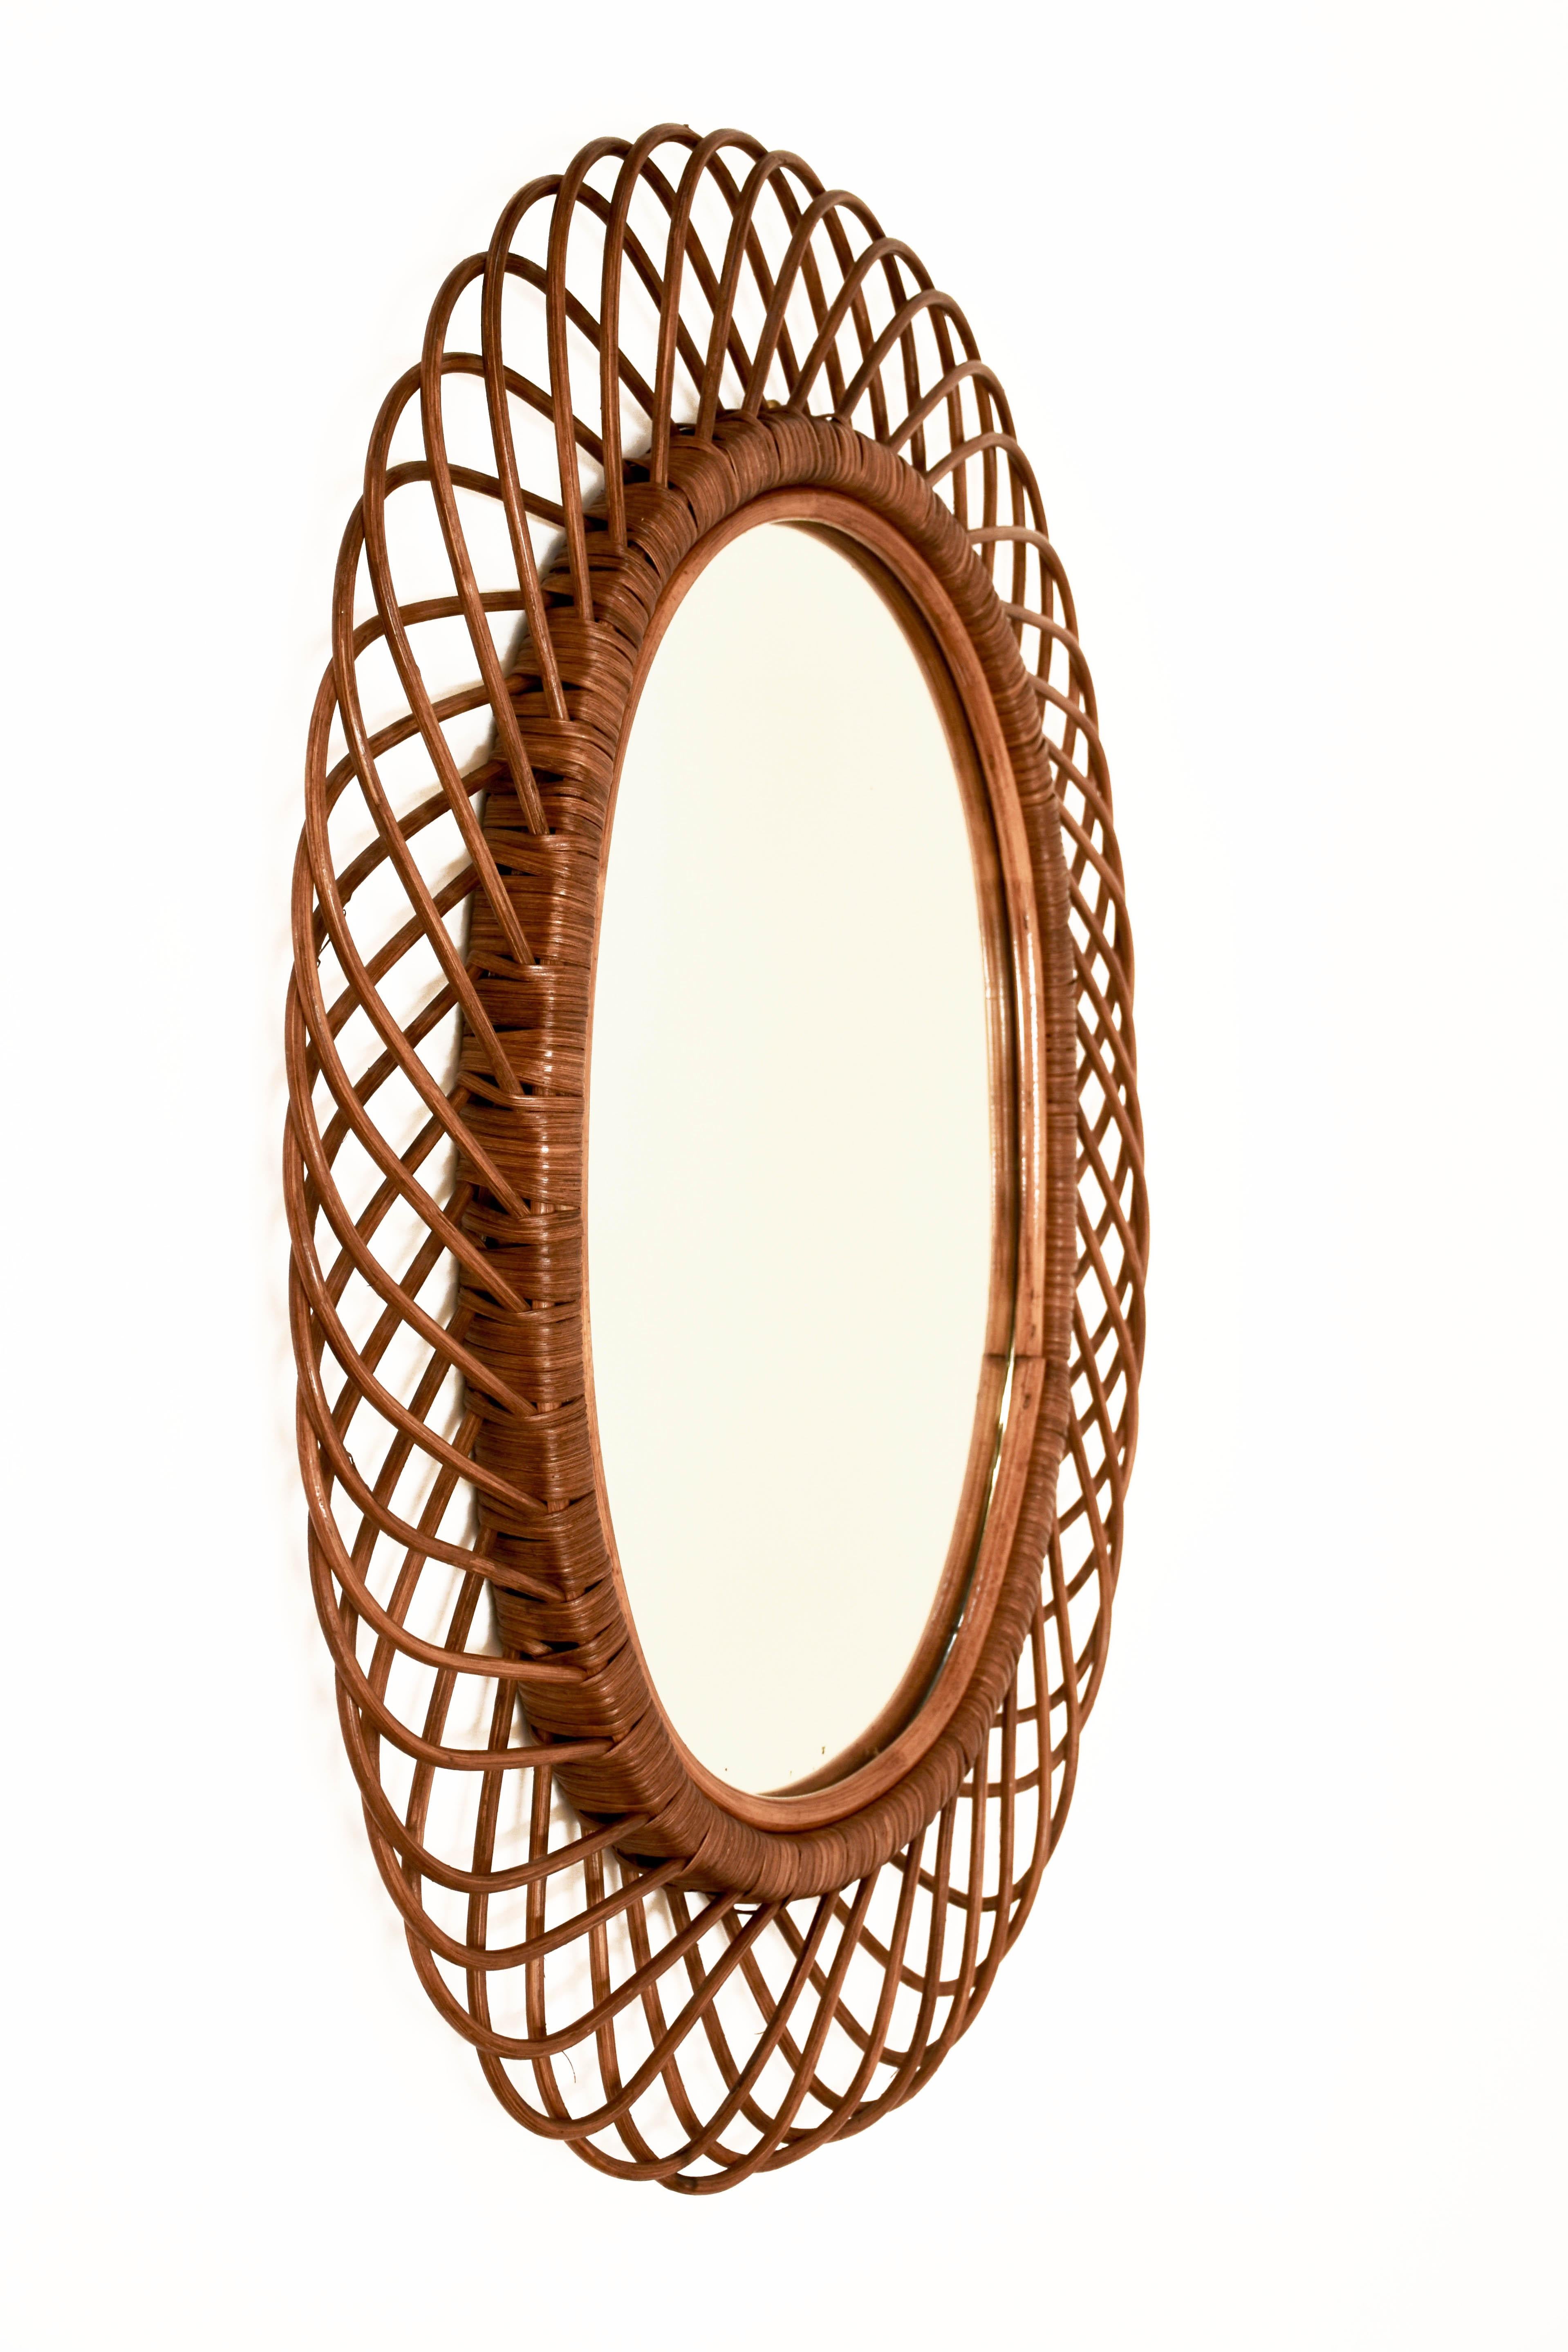 Mid-Century Modern Midcentury French Riviera Curved Rattan and Bamboo Italian Oval Mirror, 1960s